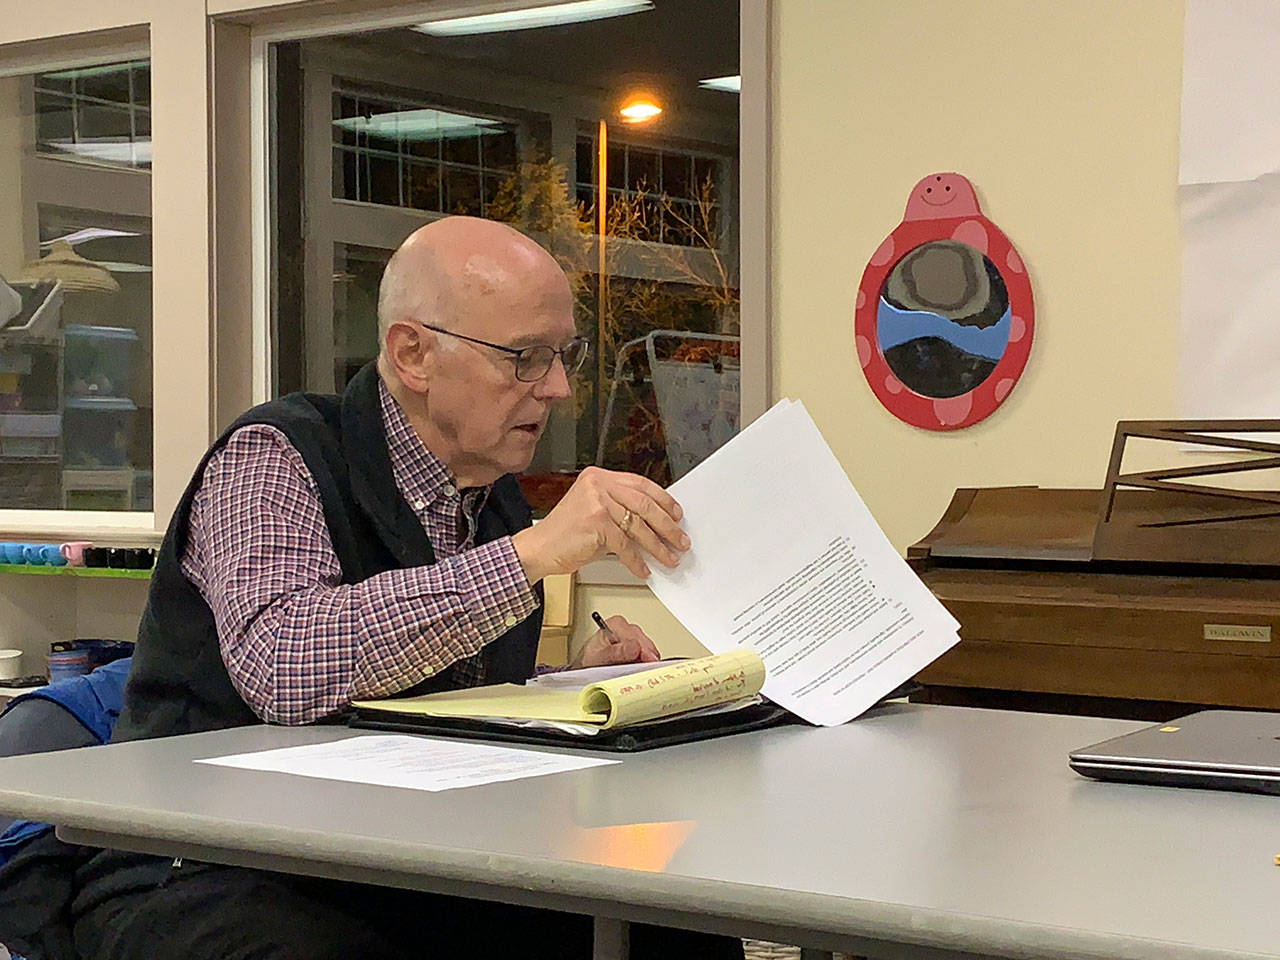 Vashon Health Care District commissioner Eric Pryne looks over his notes during a meeting at Vashon Presbyterian Church on Wednesday, Feb. 19. (Kevin Opsahl/Staff Photo)